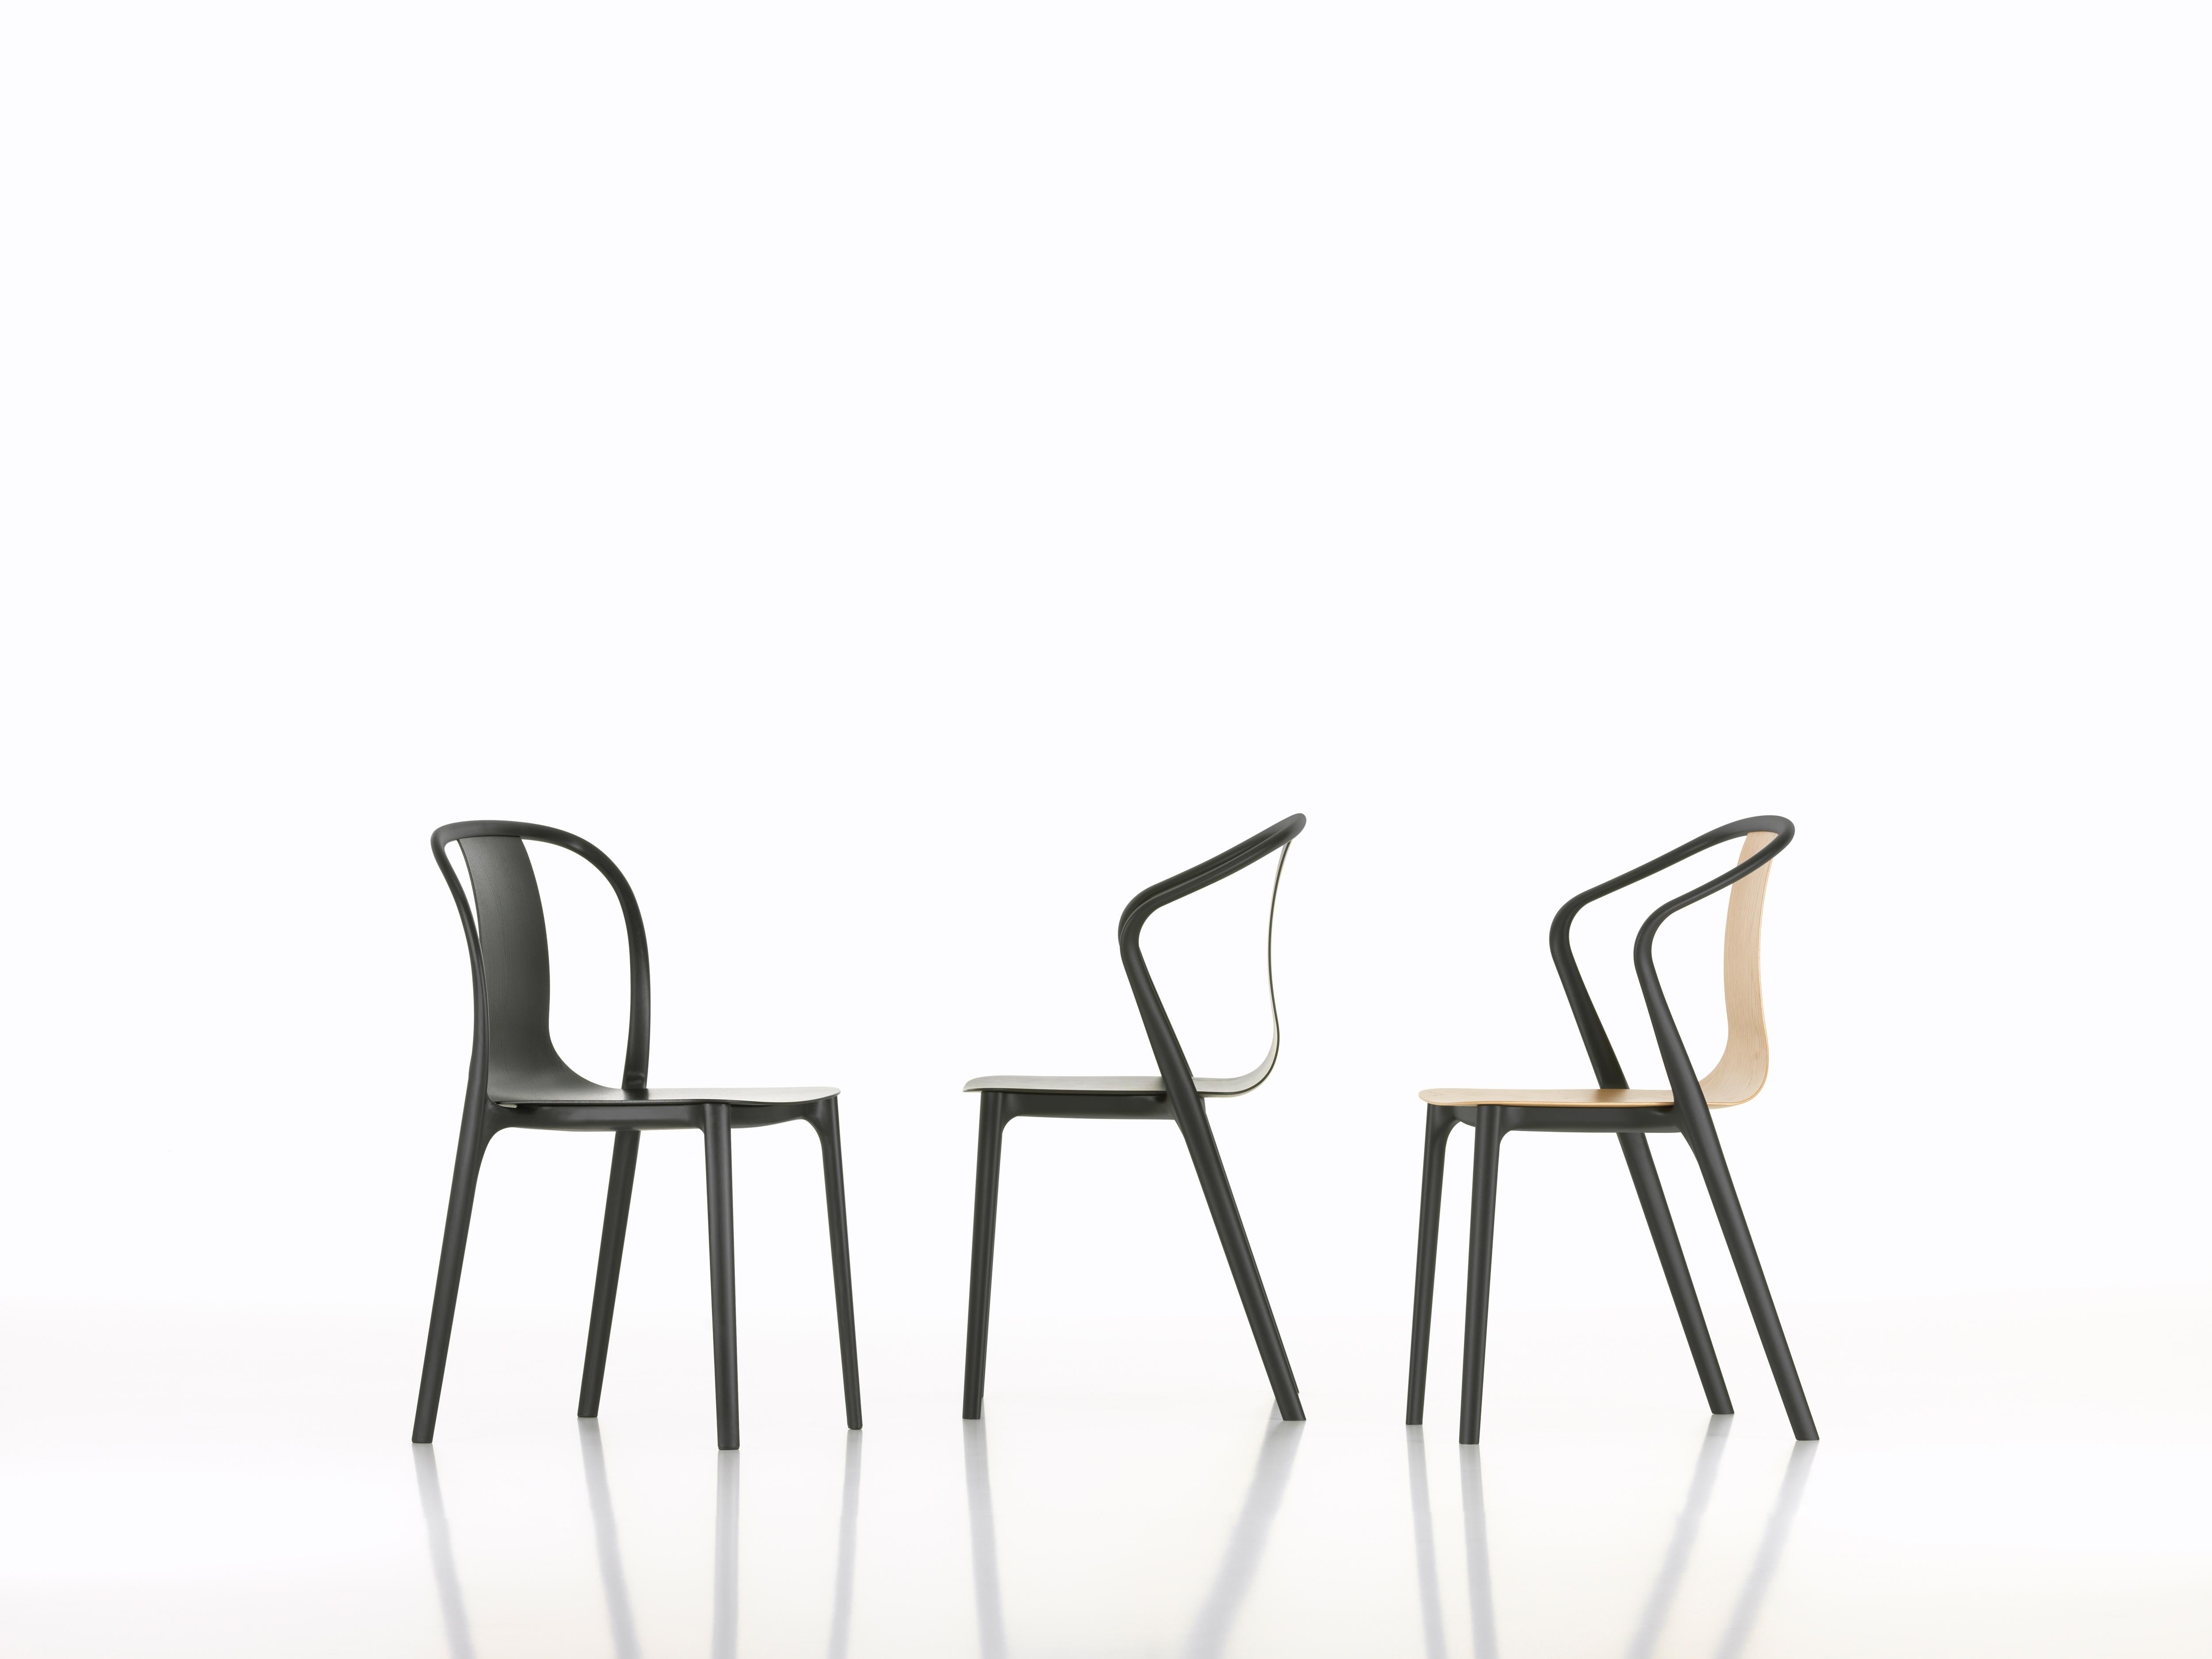 These products are only available in the United States.

Belleville is the name of the vibrant Paris neighborhood where the designers Ronan and Erwan Bouroullec have their studio. Visual references for the Belleville chair can be found in the